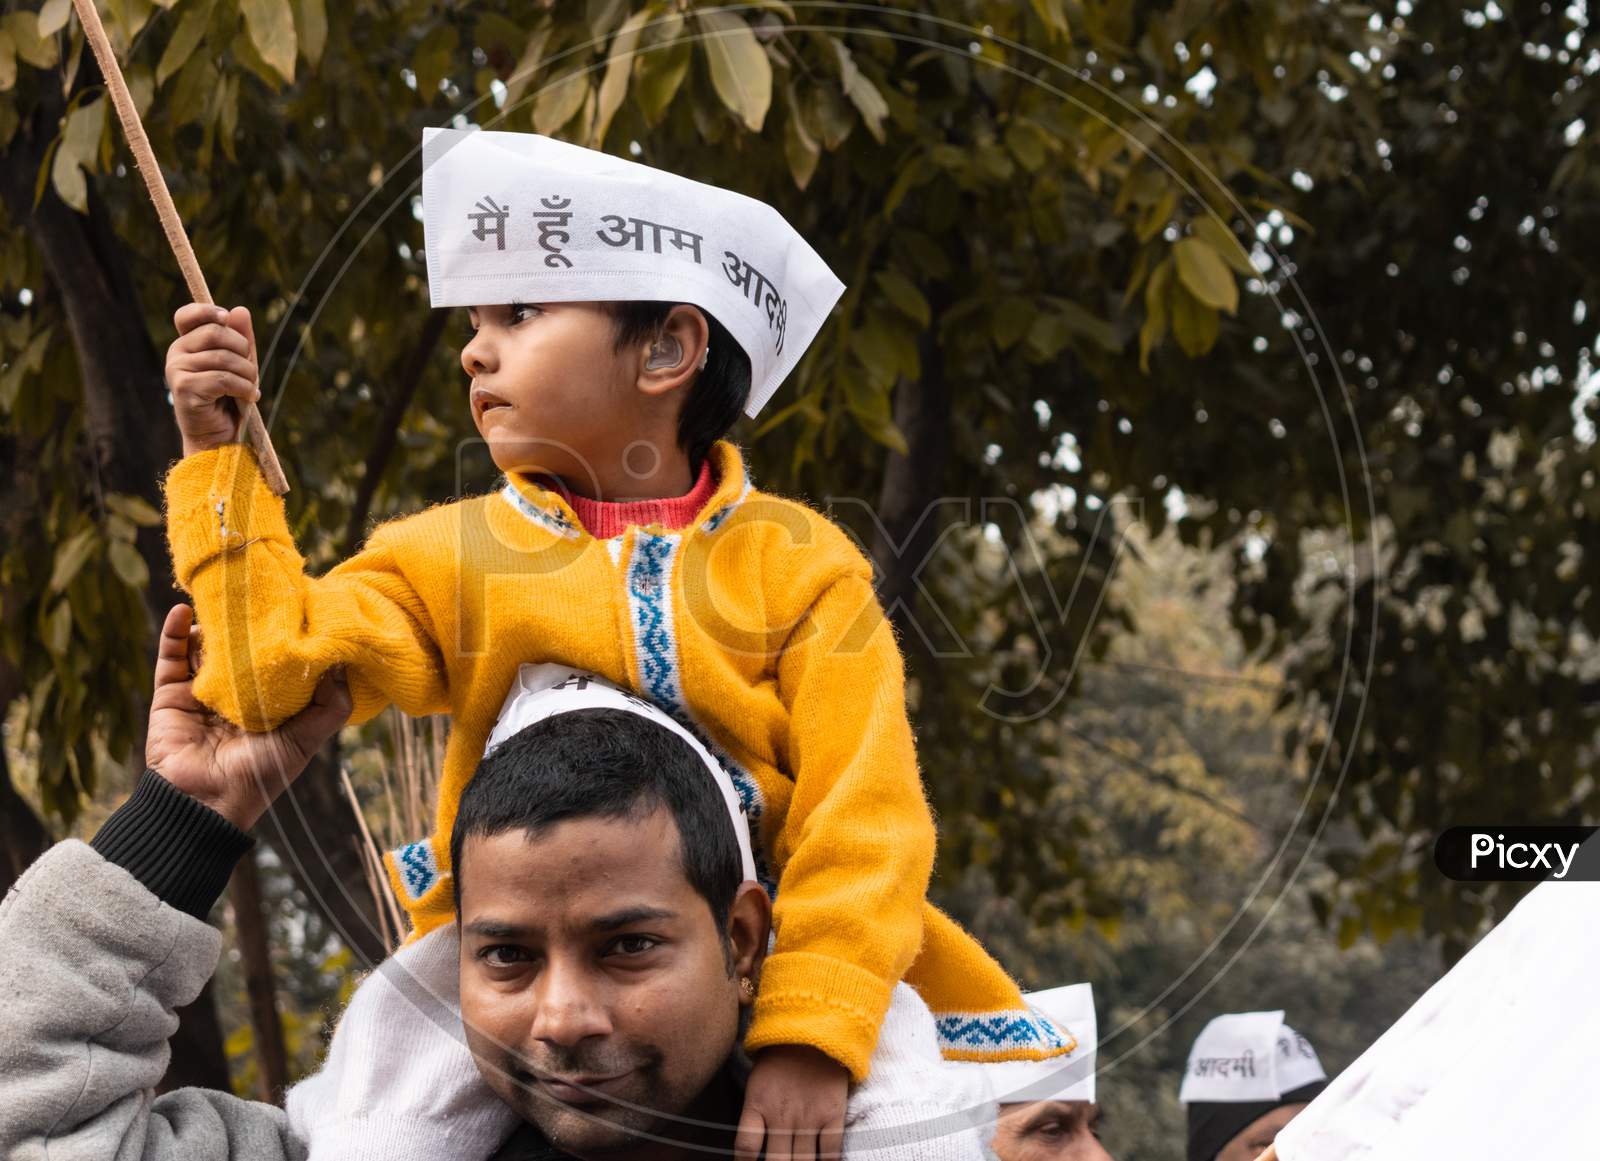 A child wearing a cap, supporting Aam Aadmi Party, during a campaign by AAP party for Delhi Assembly Election